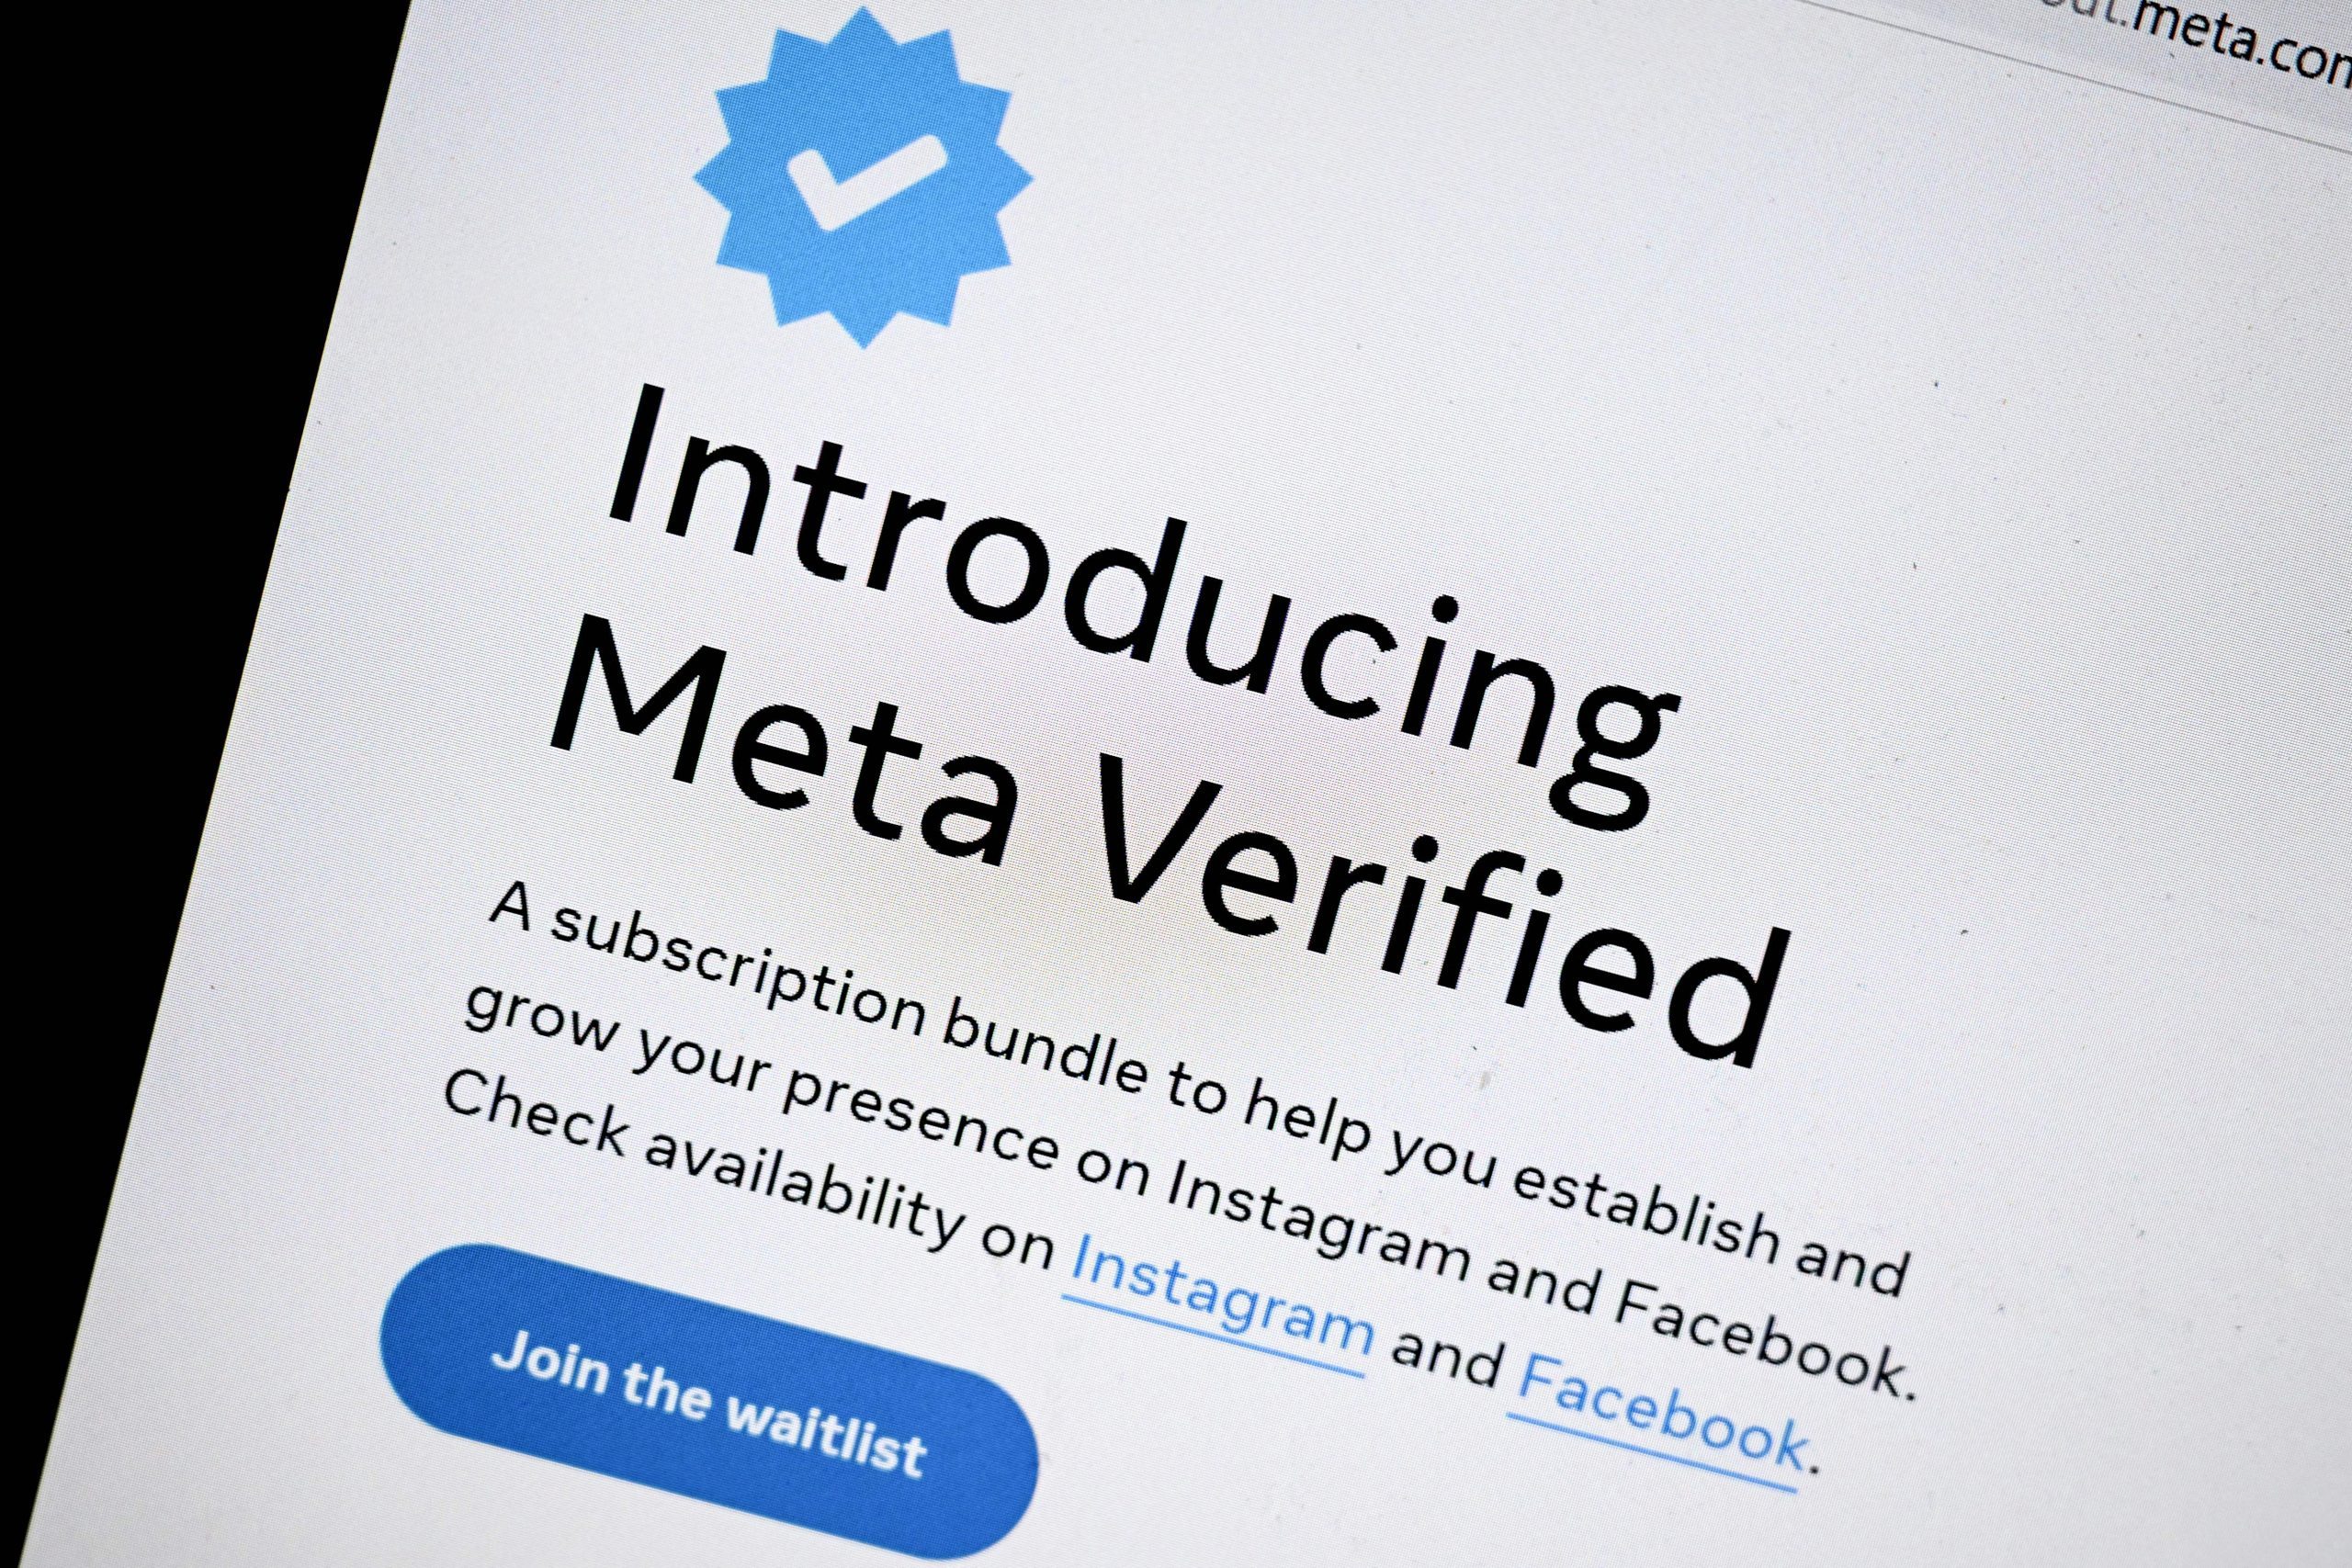 Meta Verified Accounts  Get verified on FB/IG instantly - Meta  Subscriptions Verification - Buy & Sell Facebook Fanpages - SWAPD